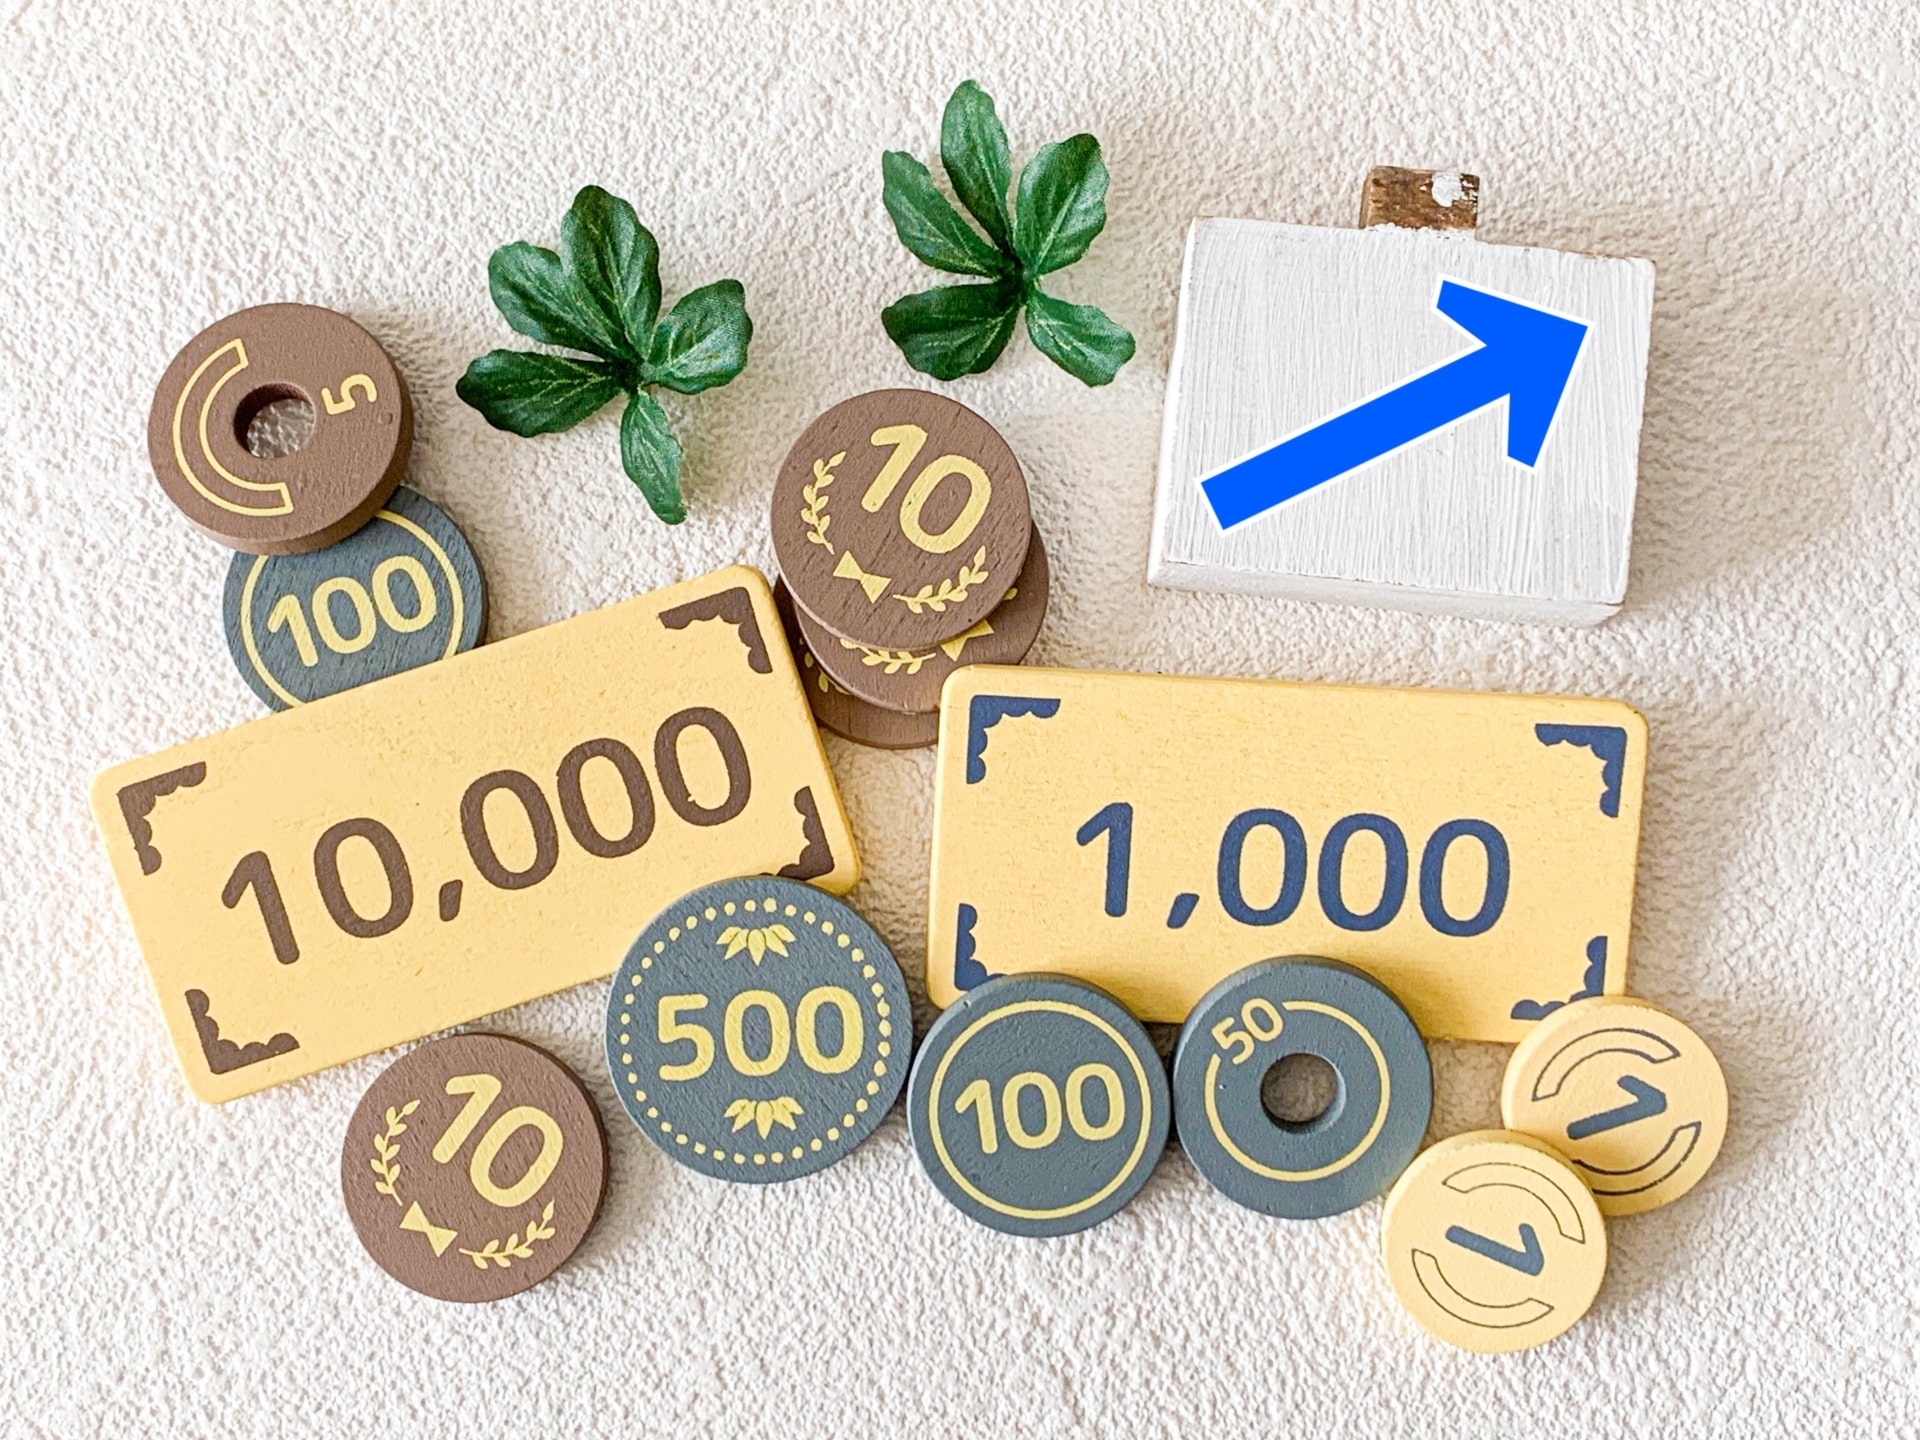 Wooden pieces representing Japanese coins and banknotes